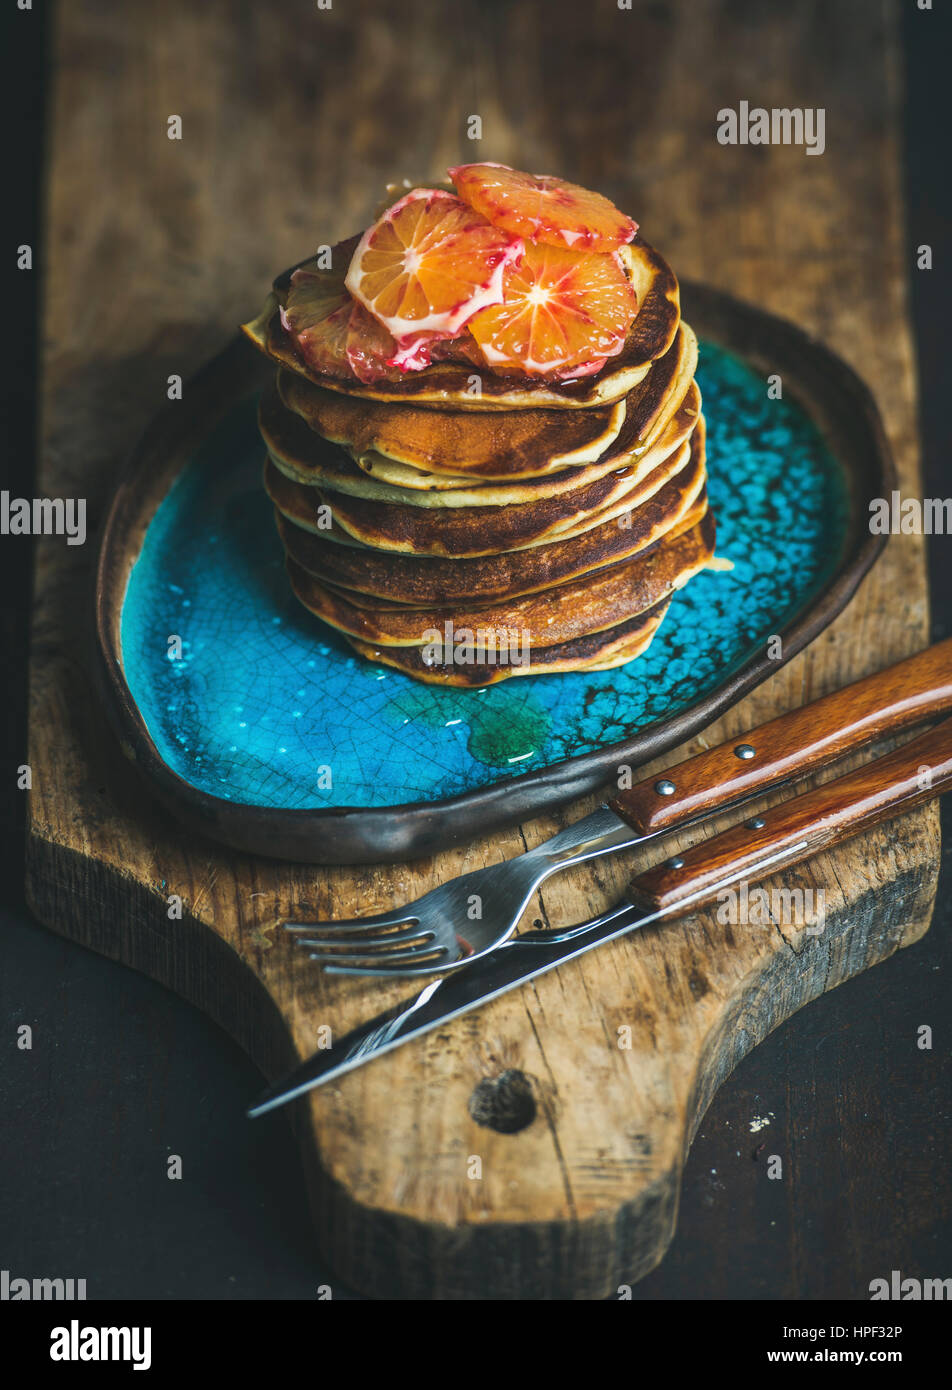 Homemade pancakes with honey and bloody orange slices for breakfast on blue ceramic plate over rustic wooden board, dark wooden scorched background, s Stock Photo